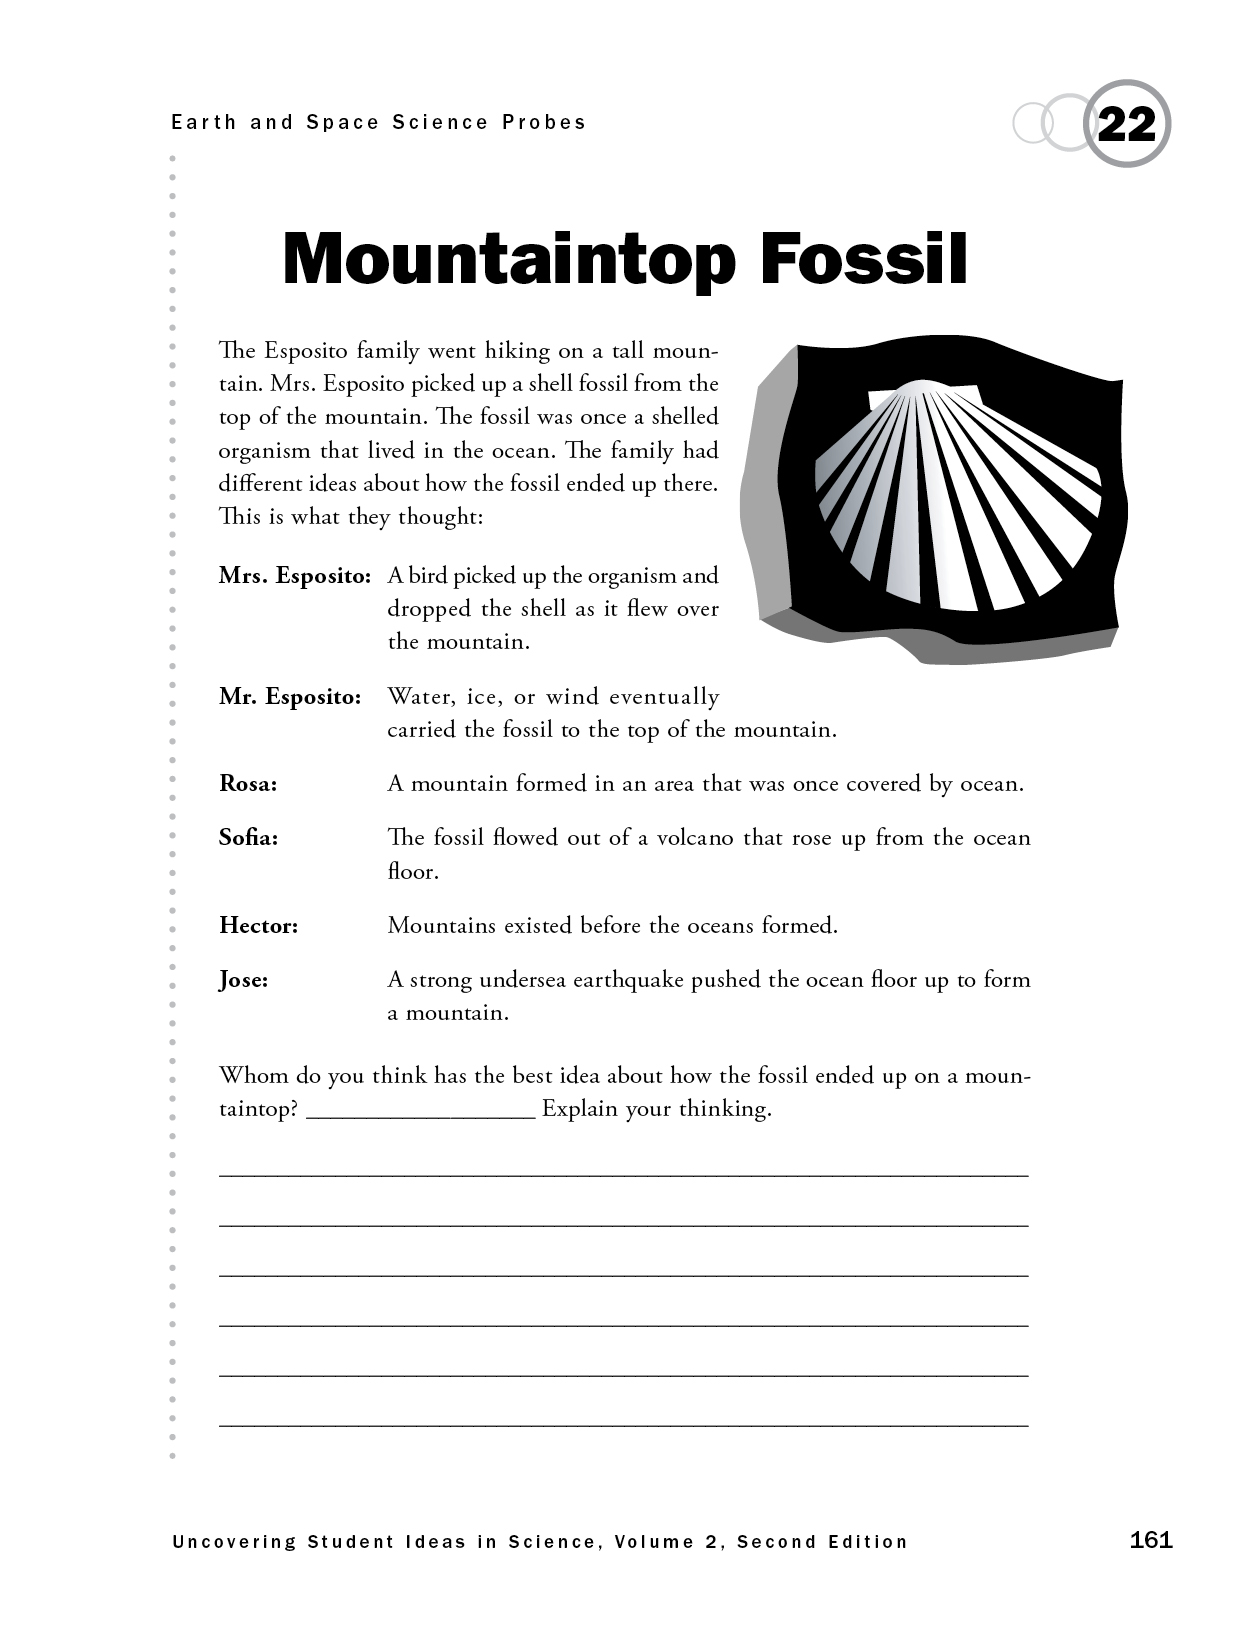 Mountaintop Fossil